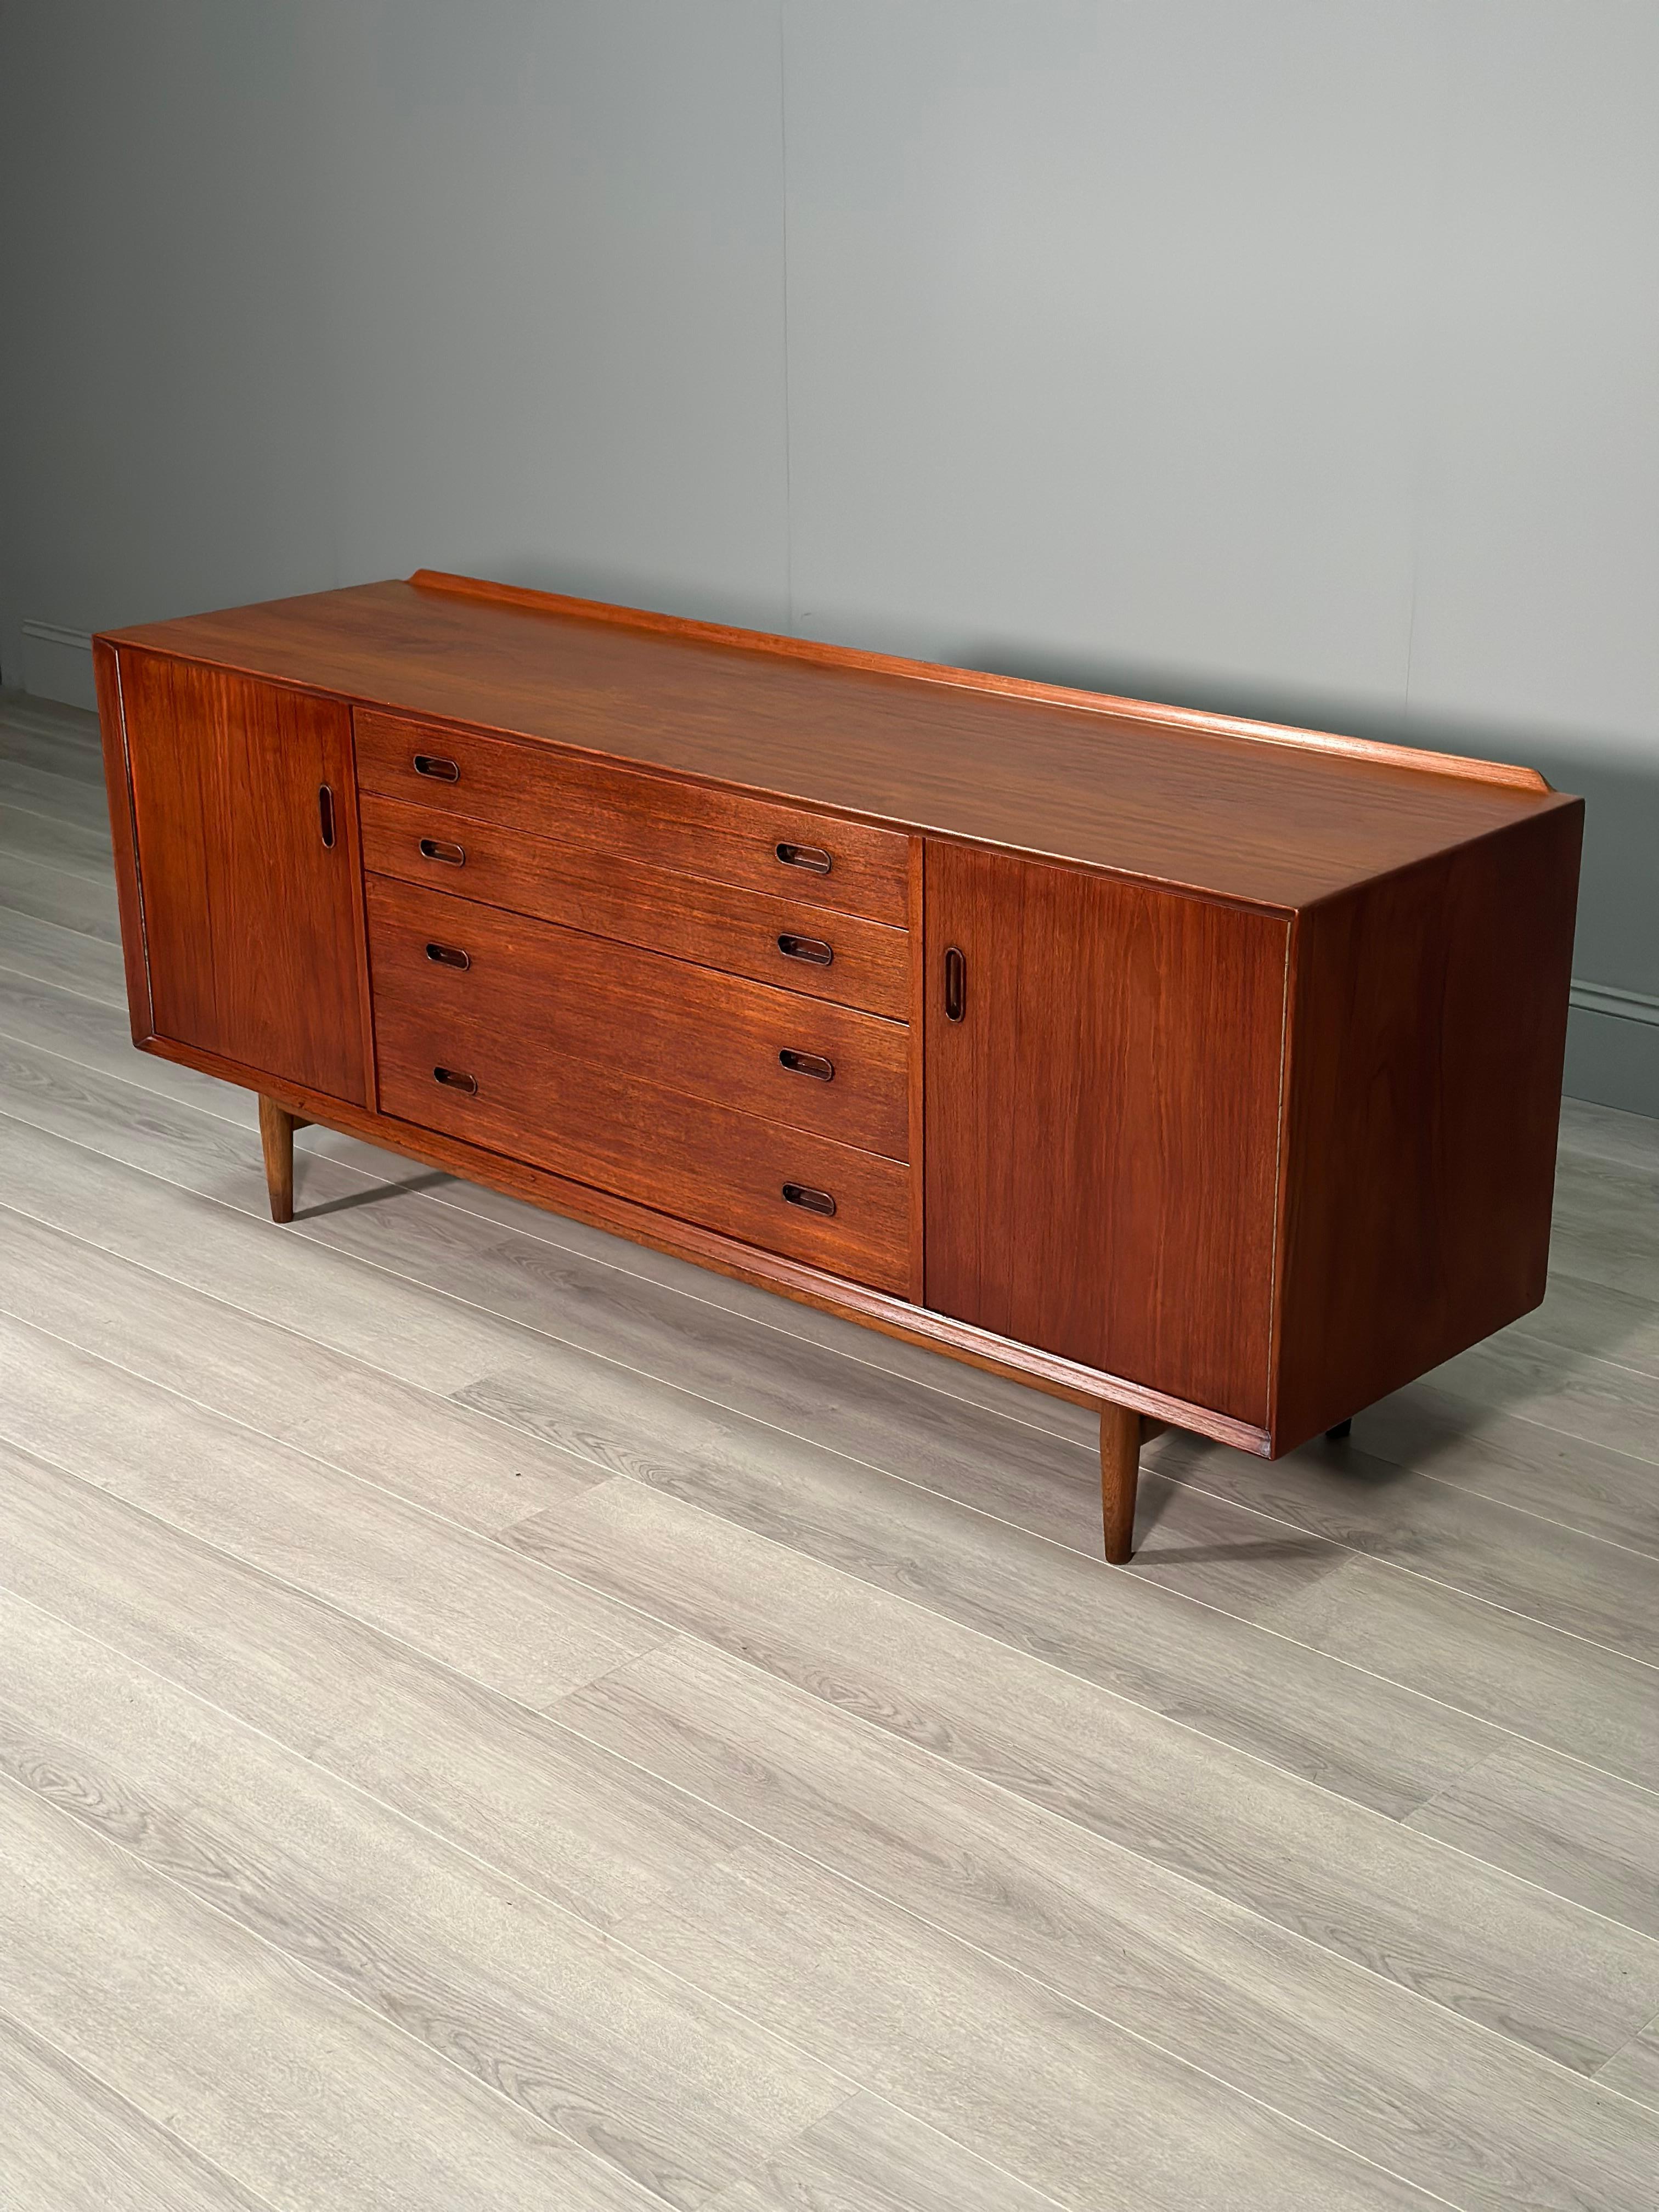 Arne Vodder Teak Sideboard By Sibast c.1955 In Good Condition For Sale In Accrington, GB